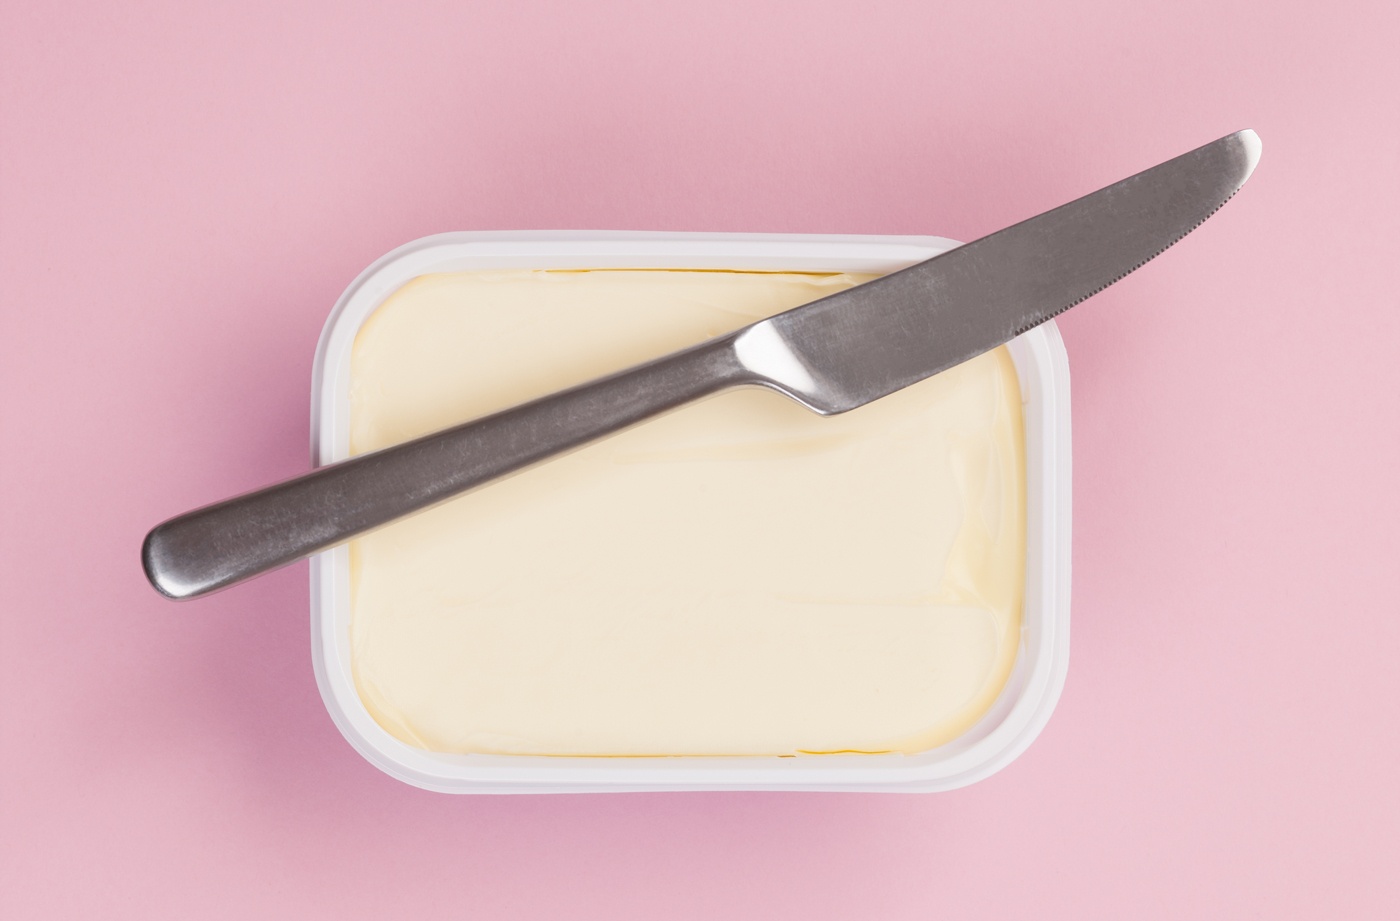 Does Butter Go Bad? Here's What An Expert Says | Well+Good